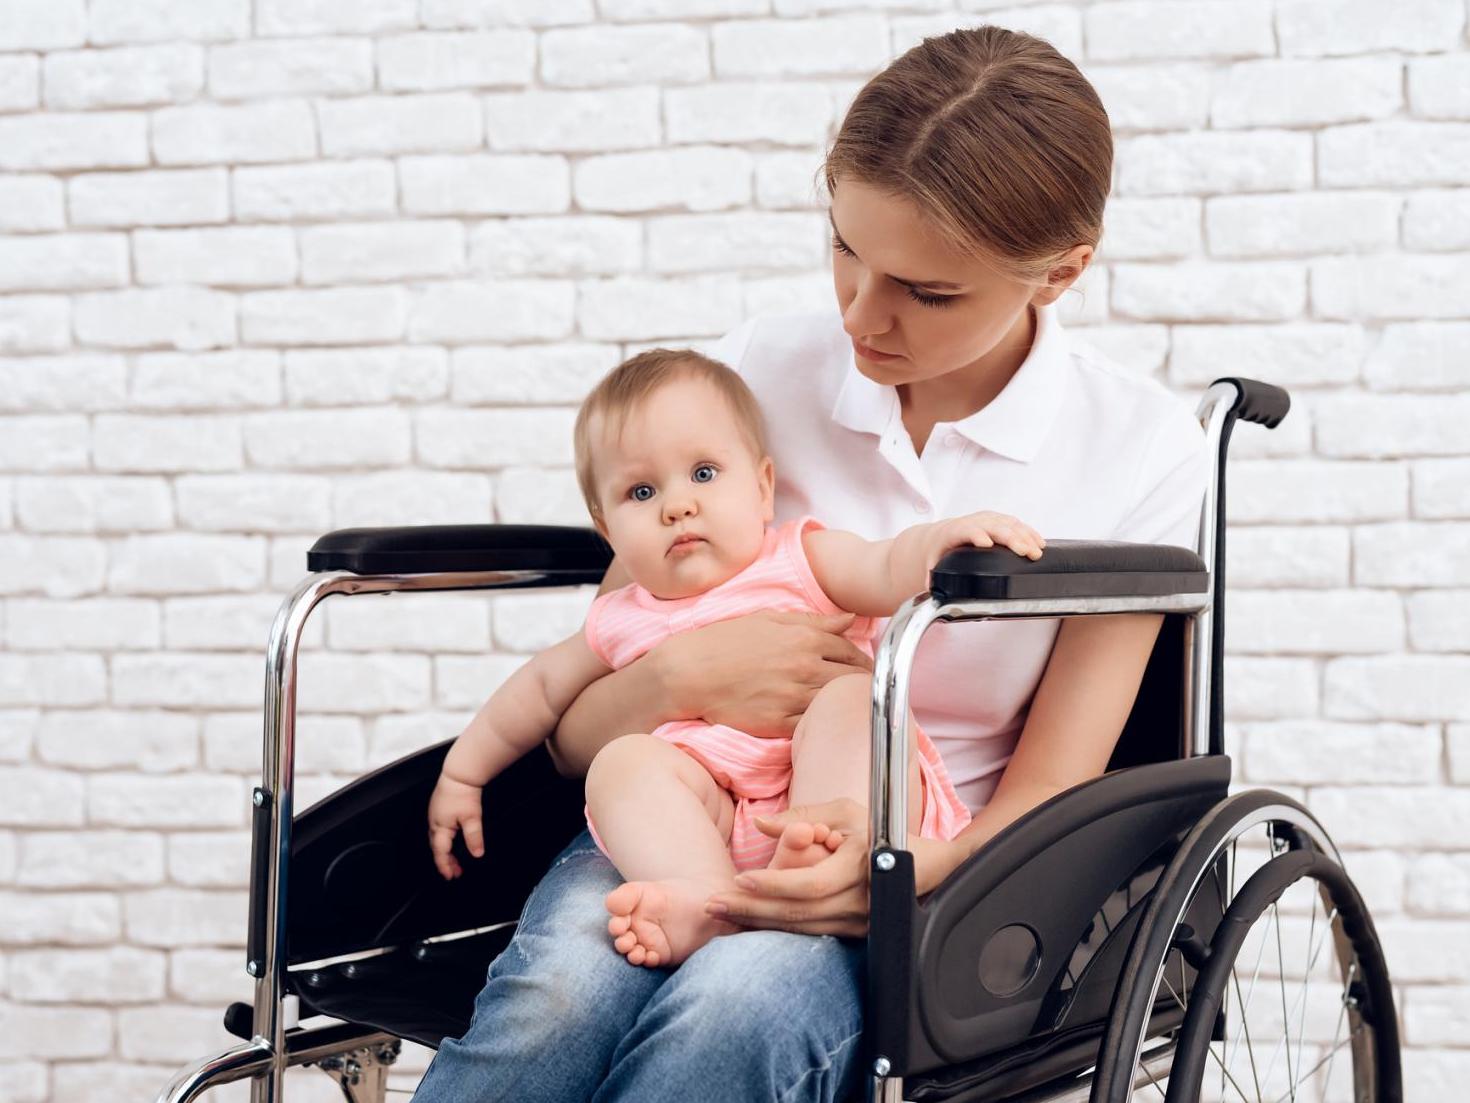 A white woman with blonde hair sits in a wheelchair holding a chubby, healthy baby